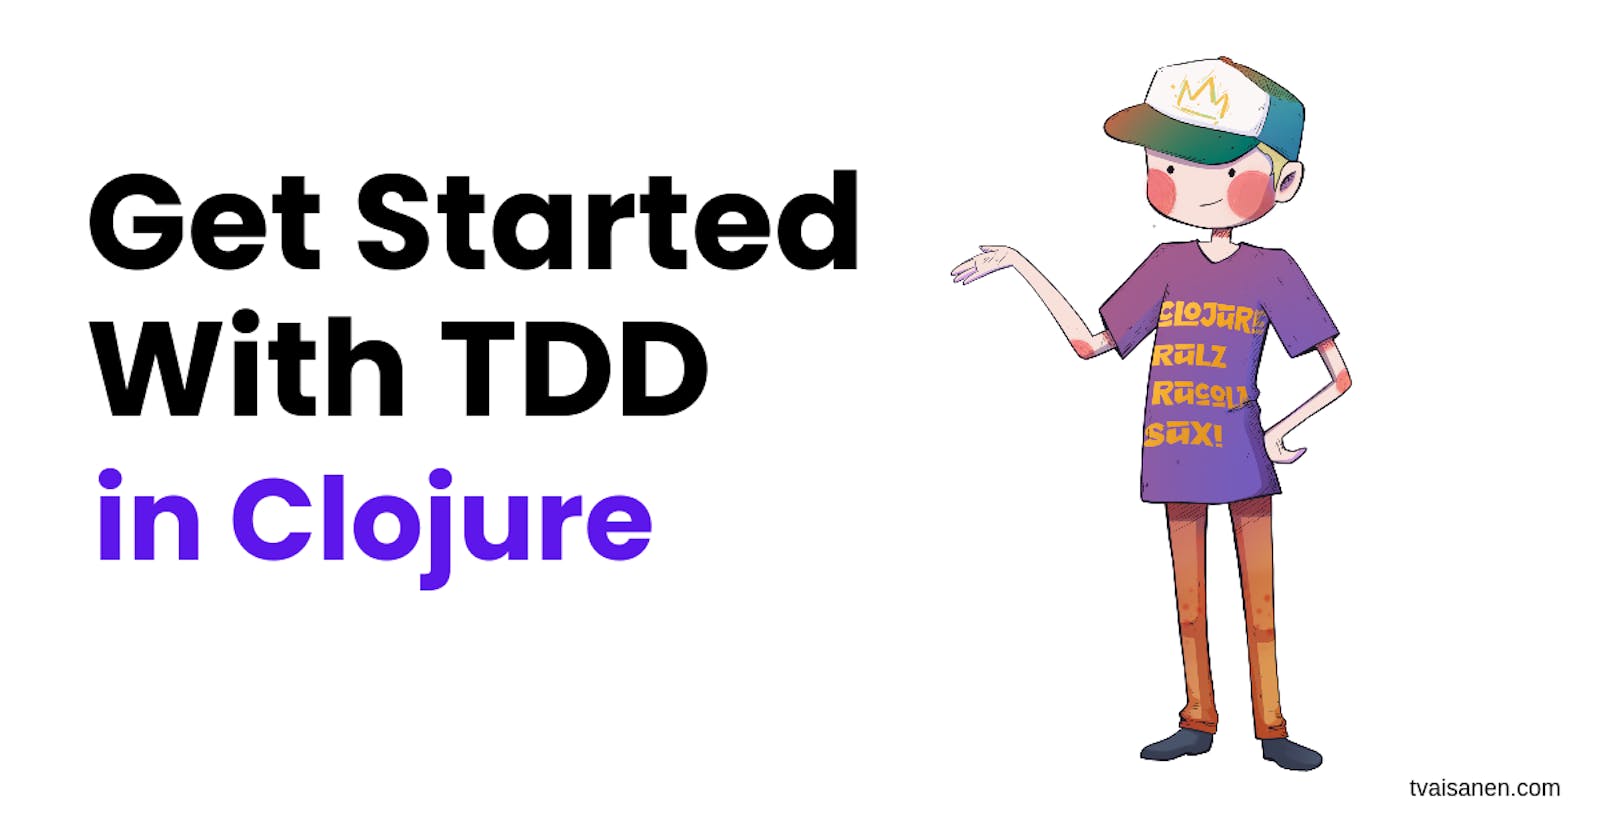 How to Get Started with TDD in Clojure